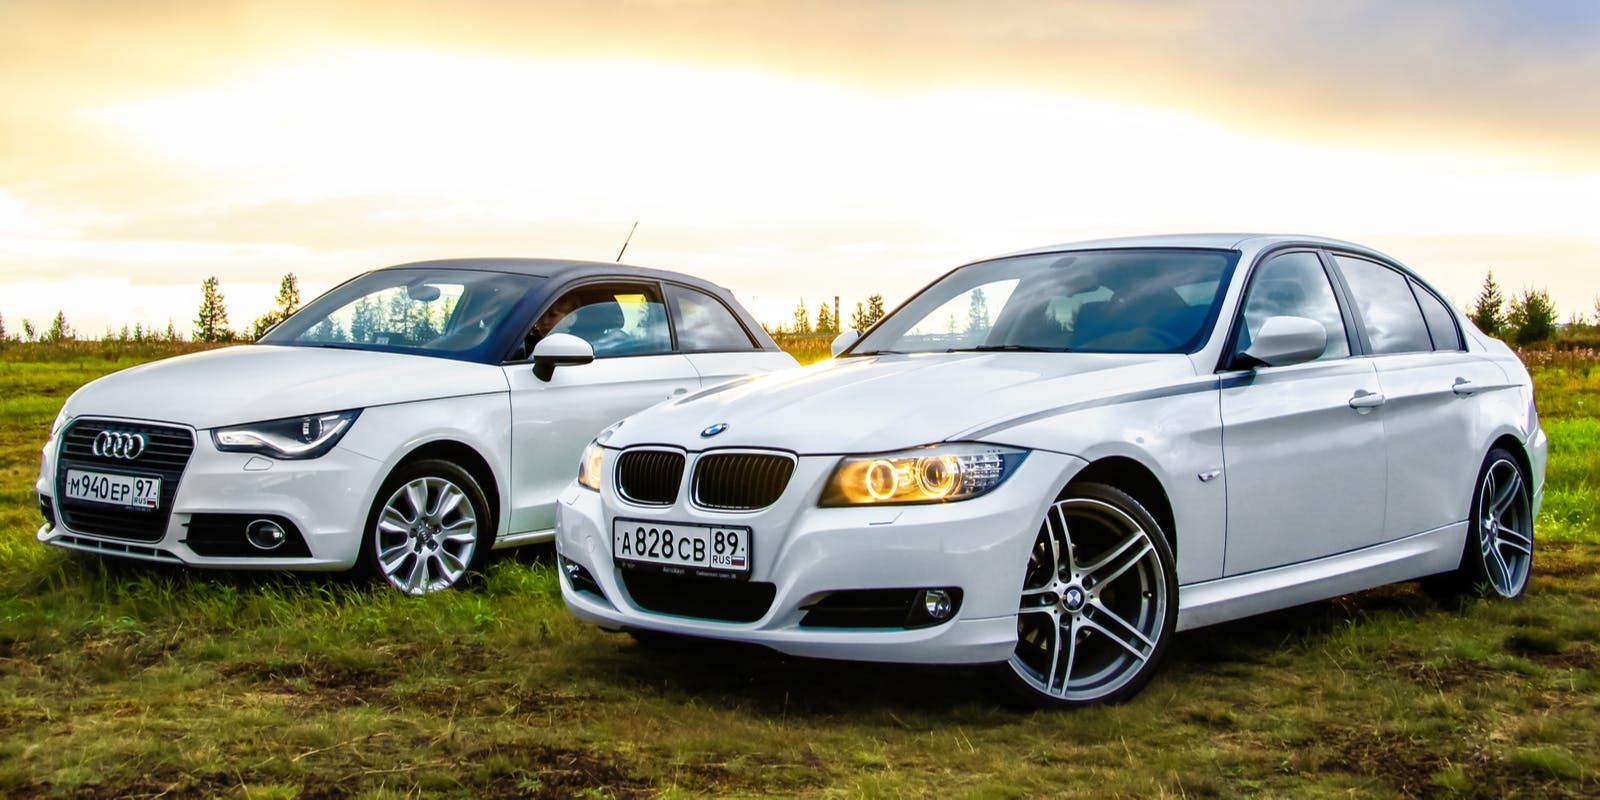 Audi vs BMW - Which Brand Is Better?